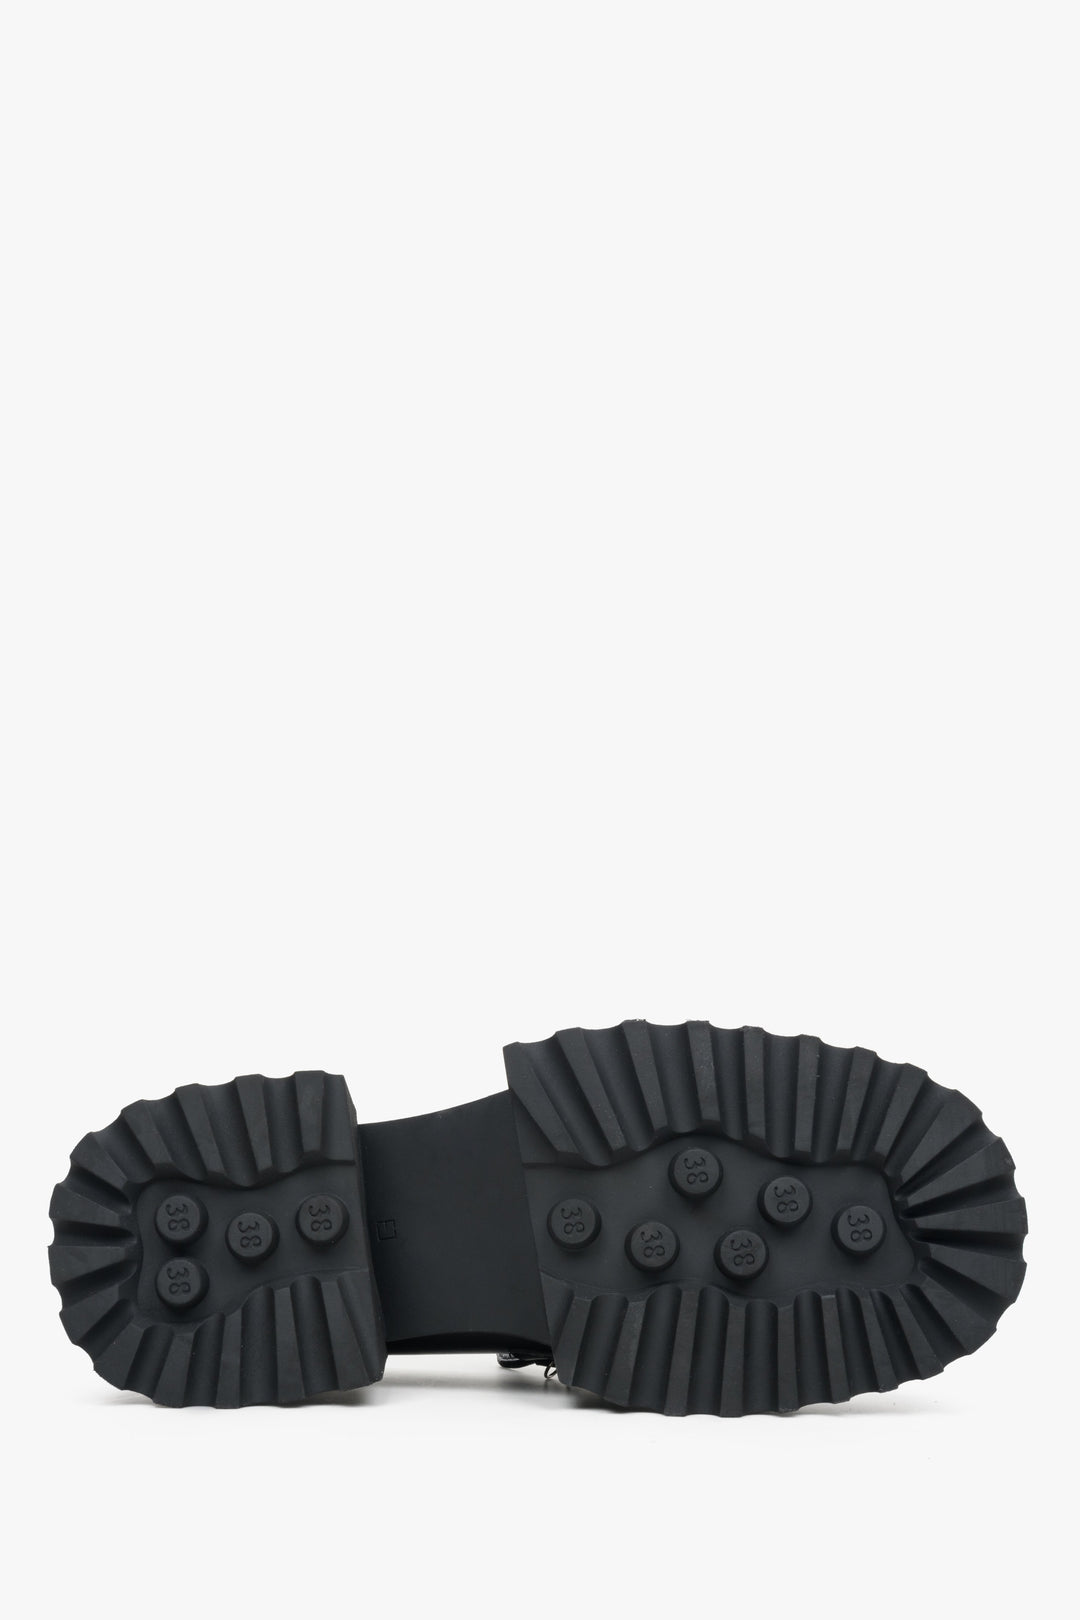 Women's black leather moccasins by Estro - close-up on the sole.